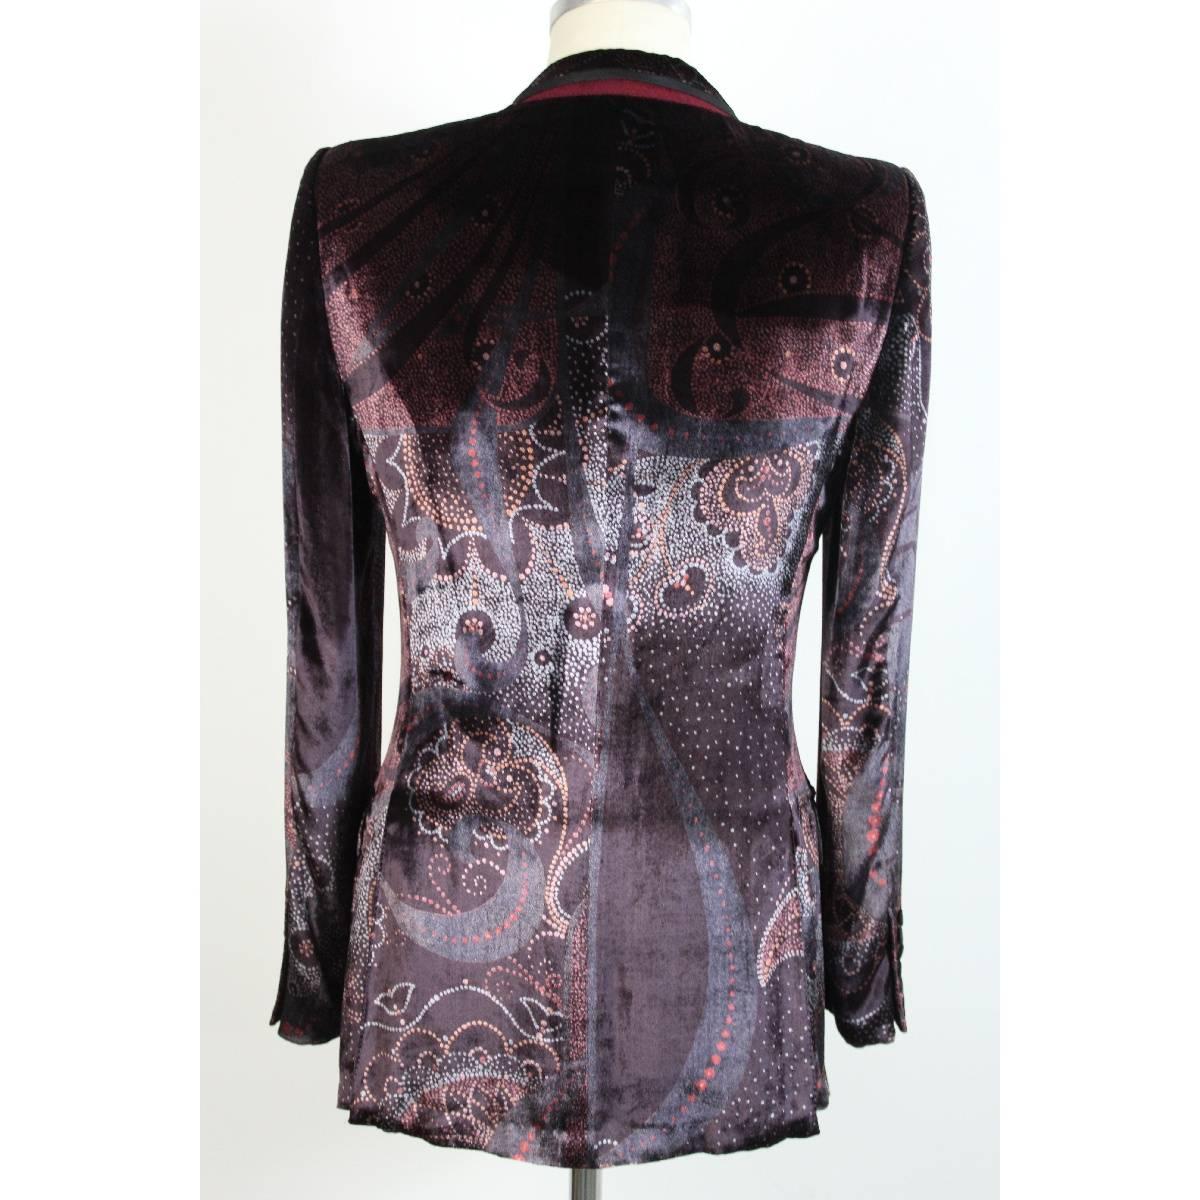 Tom Ford for Gucci silk and velvet flower and pois tone on tone, color purple jacket like tuxedo, size 48 it, the tuxedo-style jacket with a button closure, black neck trim, as well as the button, chest pocket and two pockets on the hips, excellent